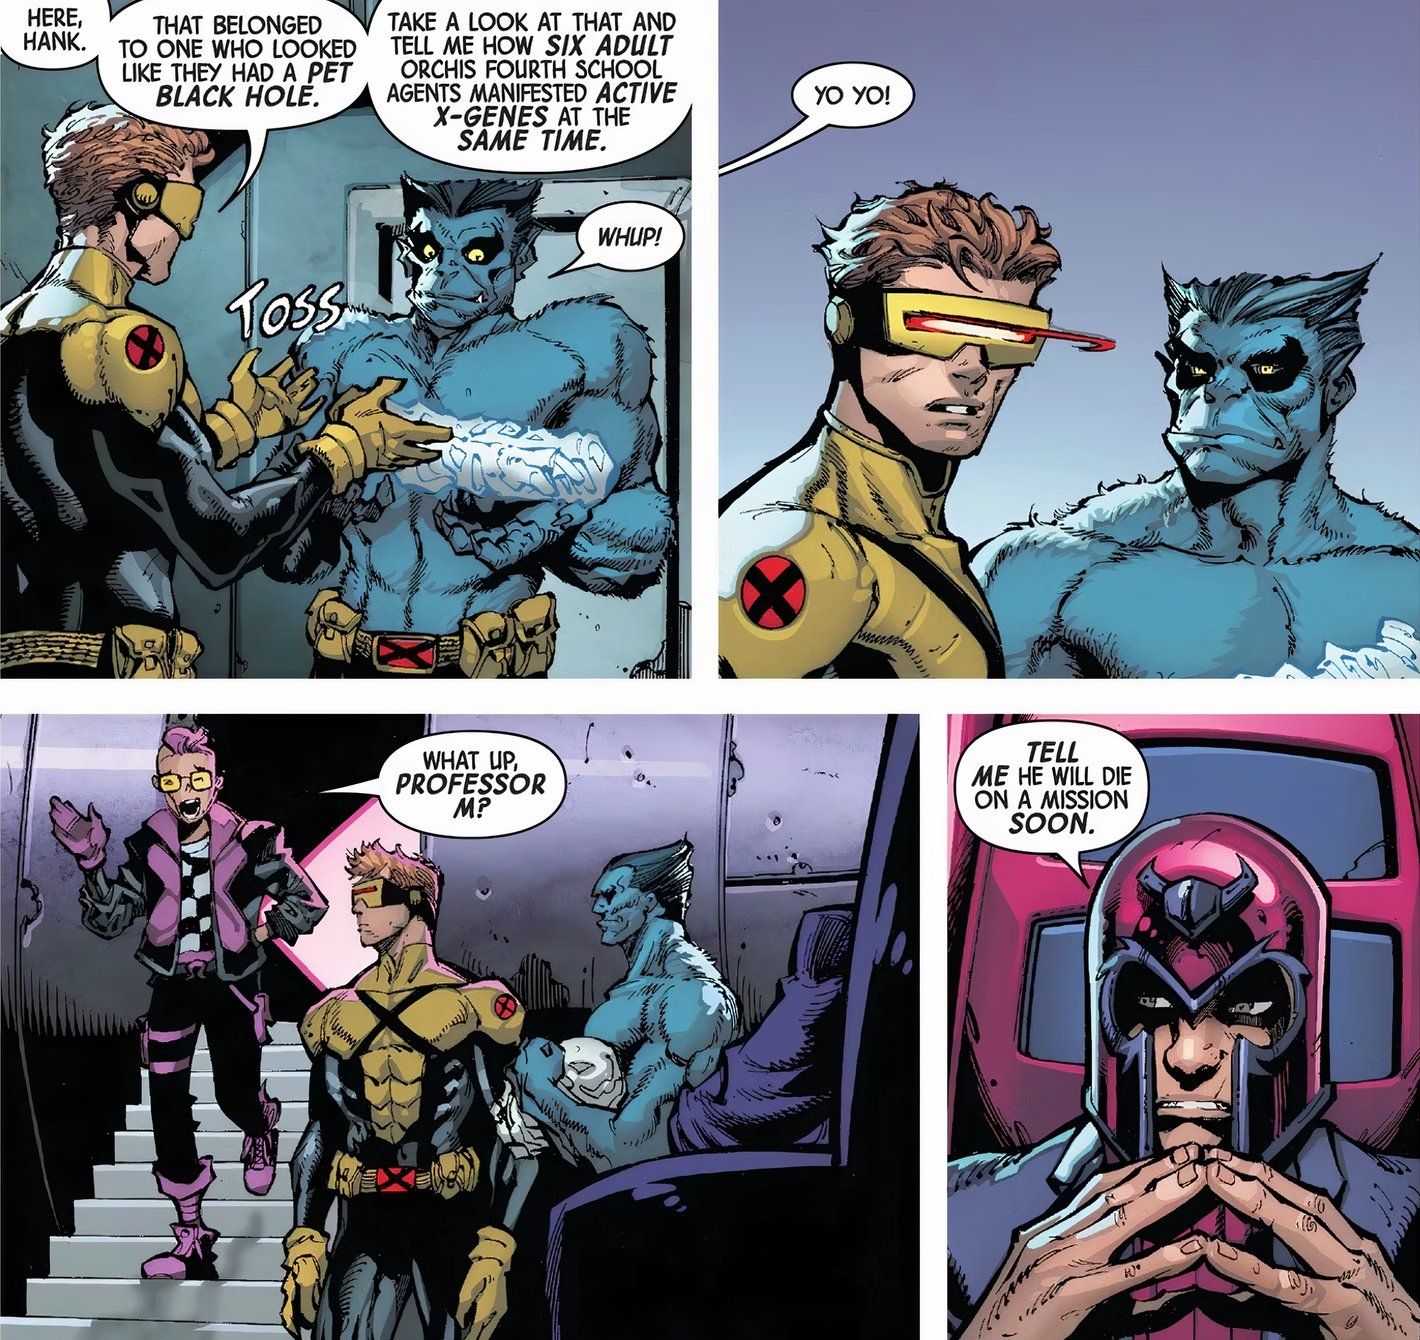 Cyclops and Beast talk about a mission, Kid Omega steps off the X-Men's plane, and Magneto sits with his fingers steepled. 